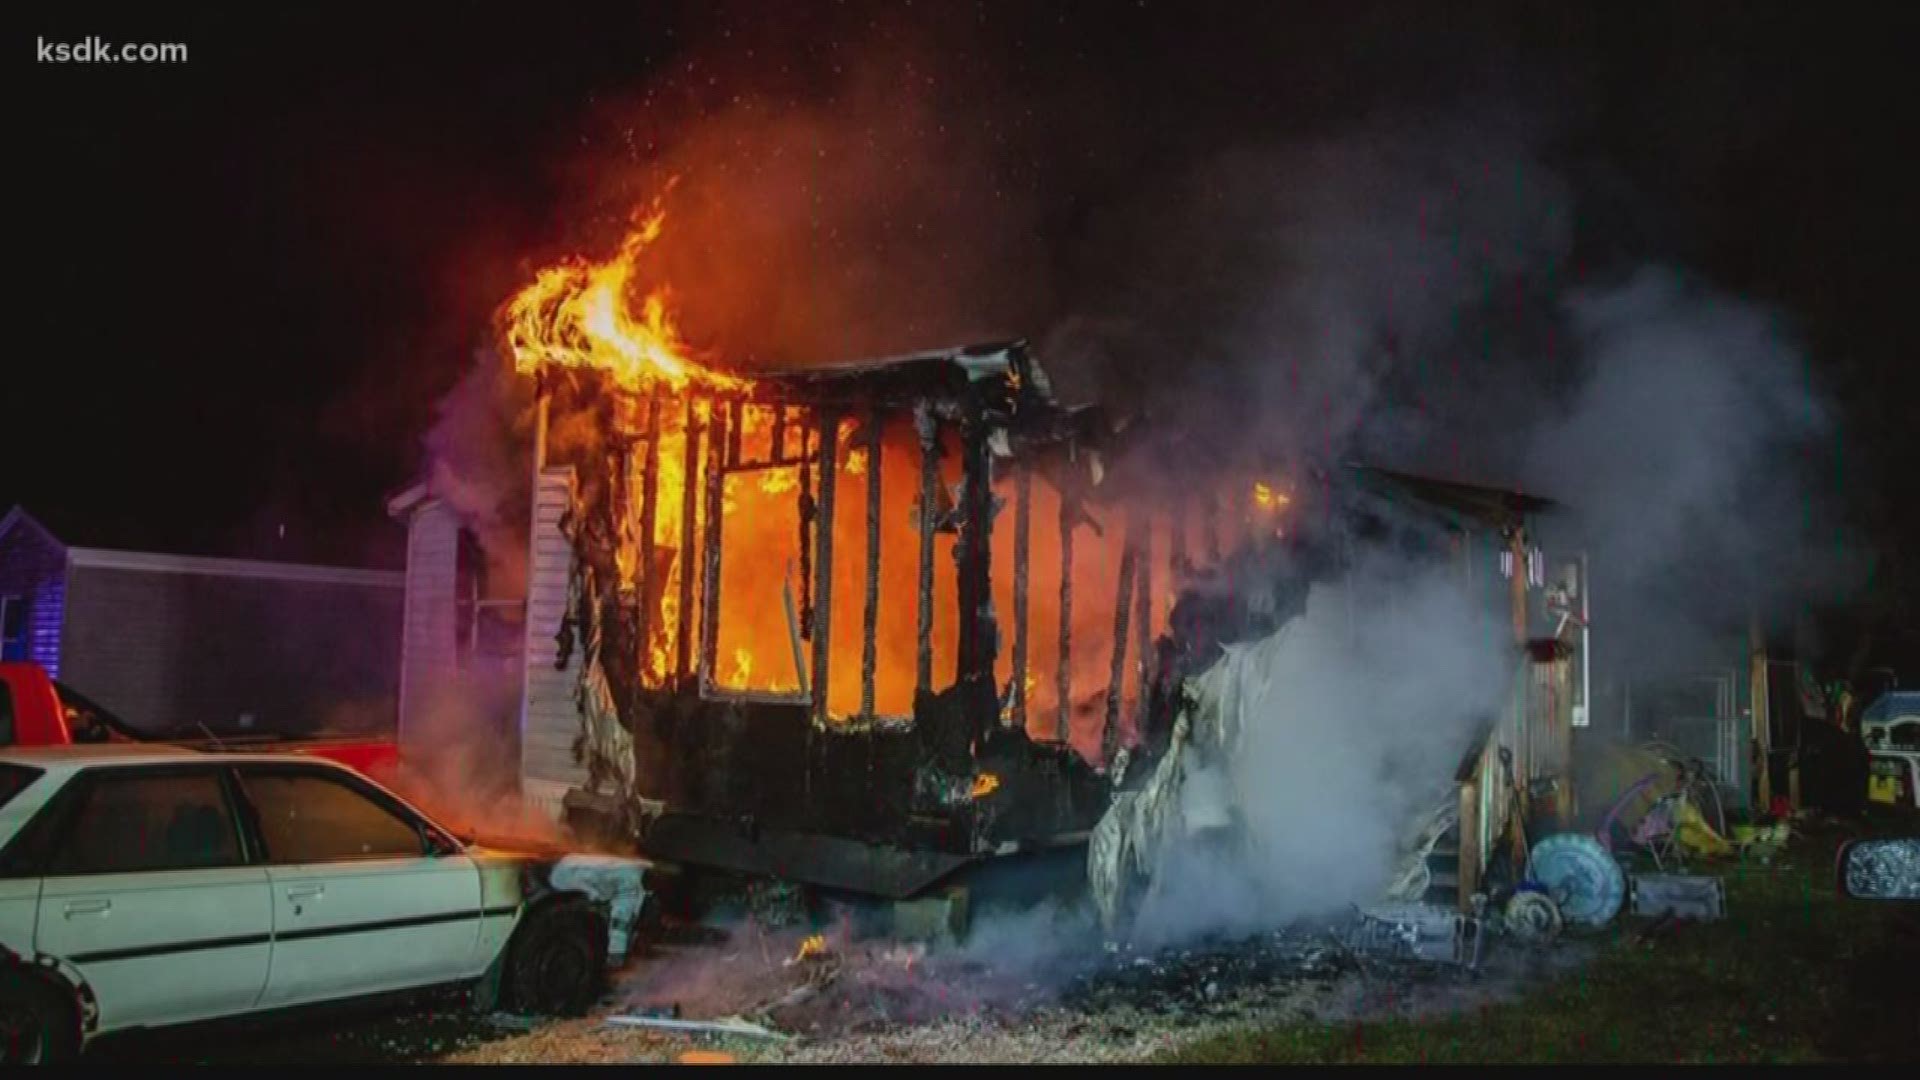 The Lincoln County father tried to save his young son during a fatal fire.